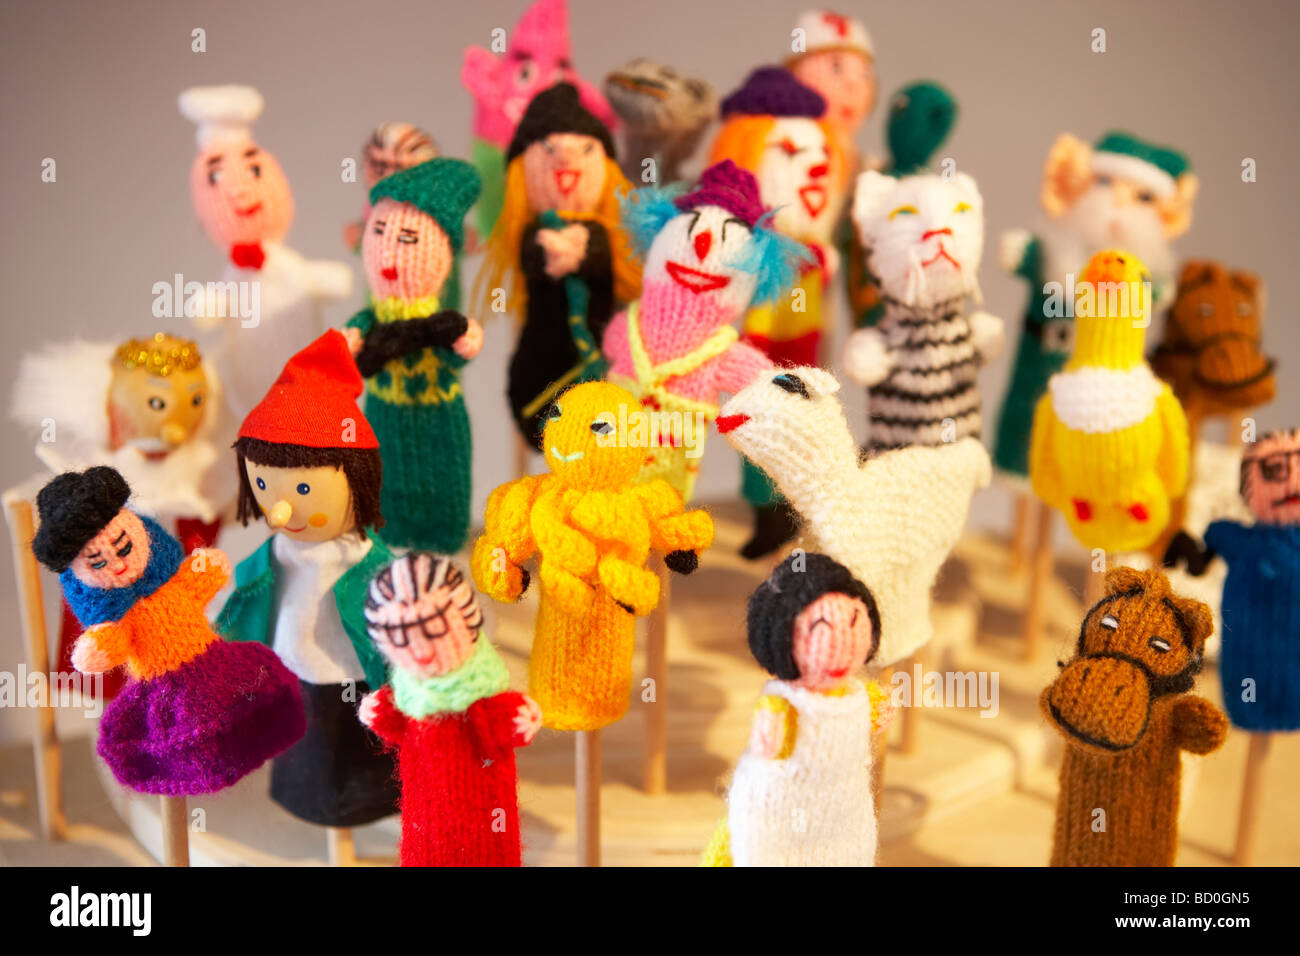 Woolen finger puppets, on display in a shop Stock Photo